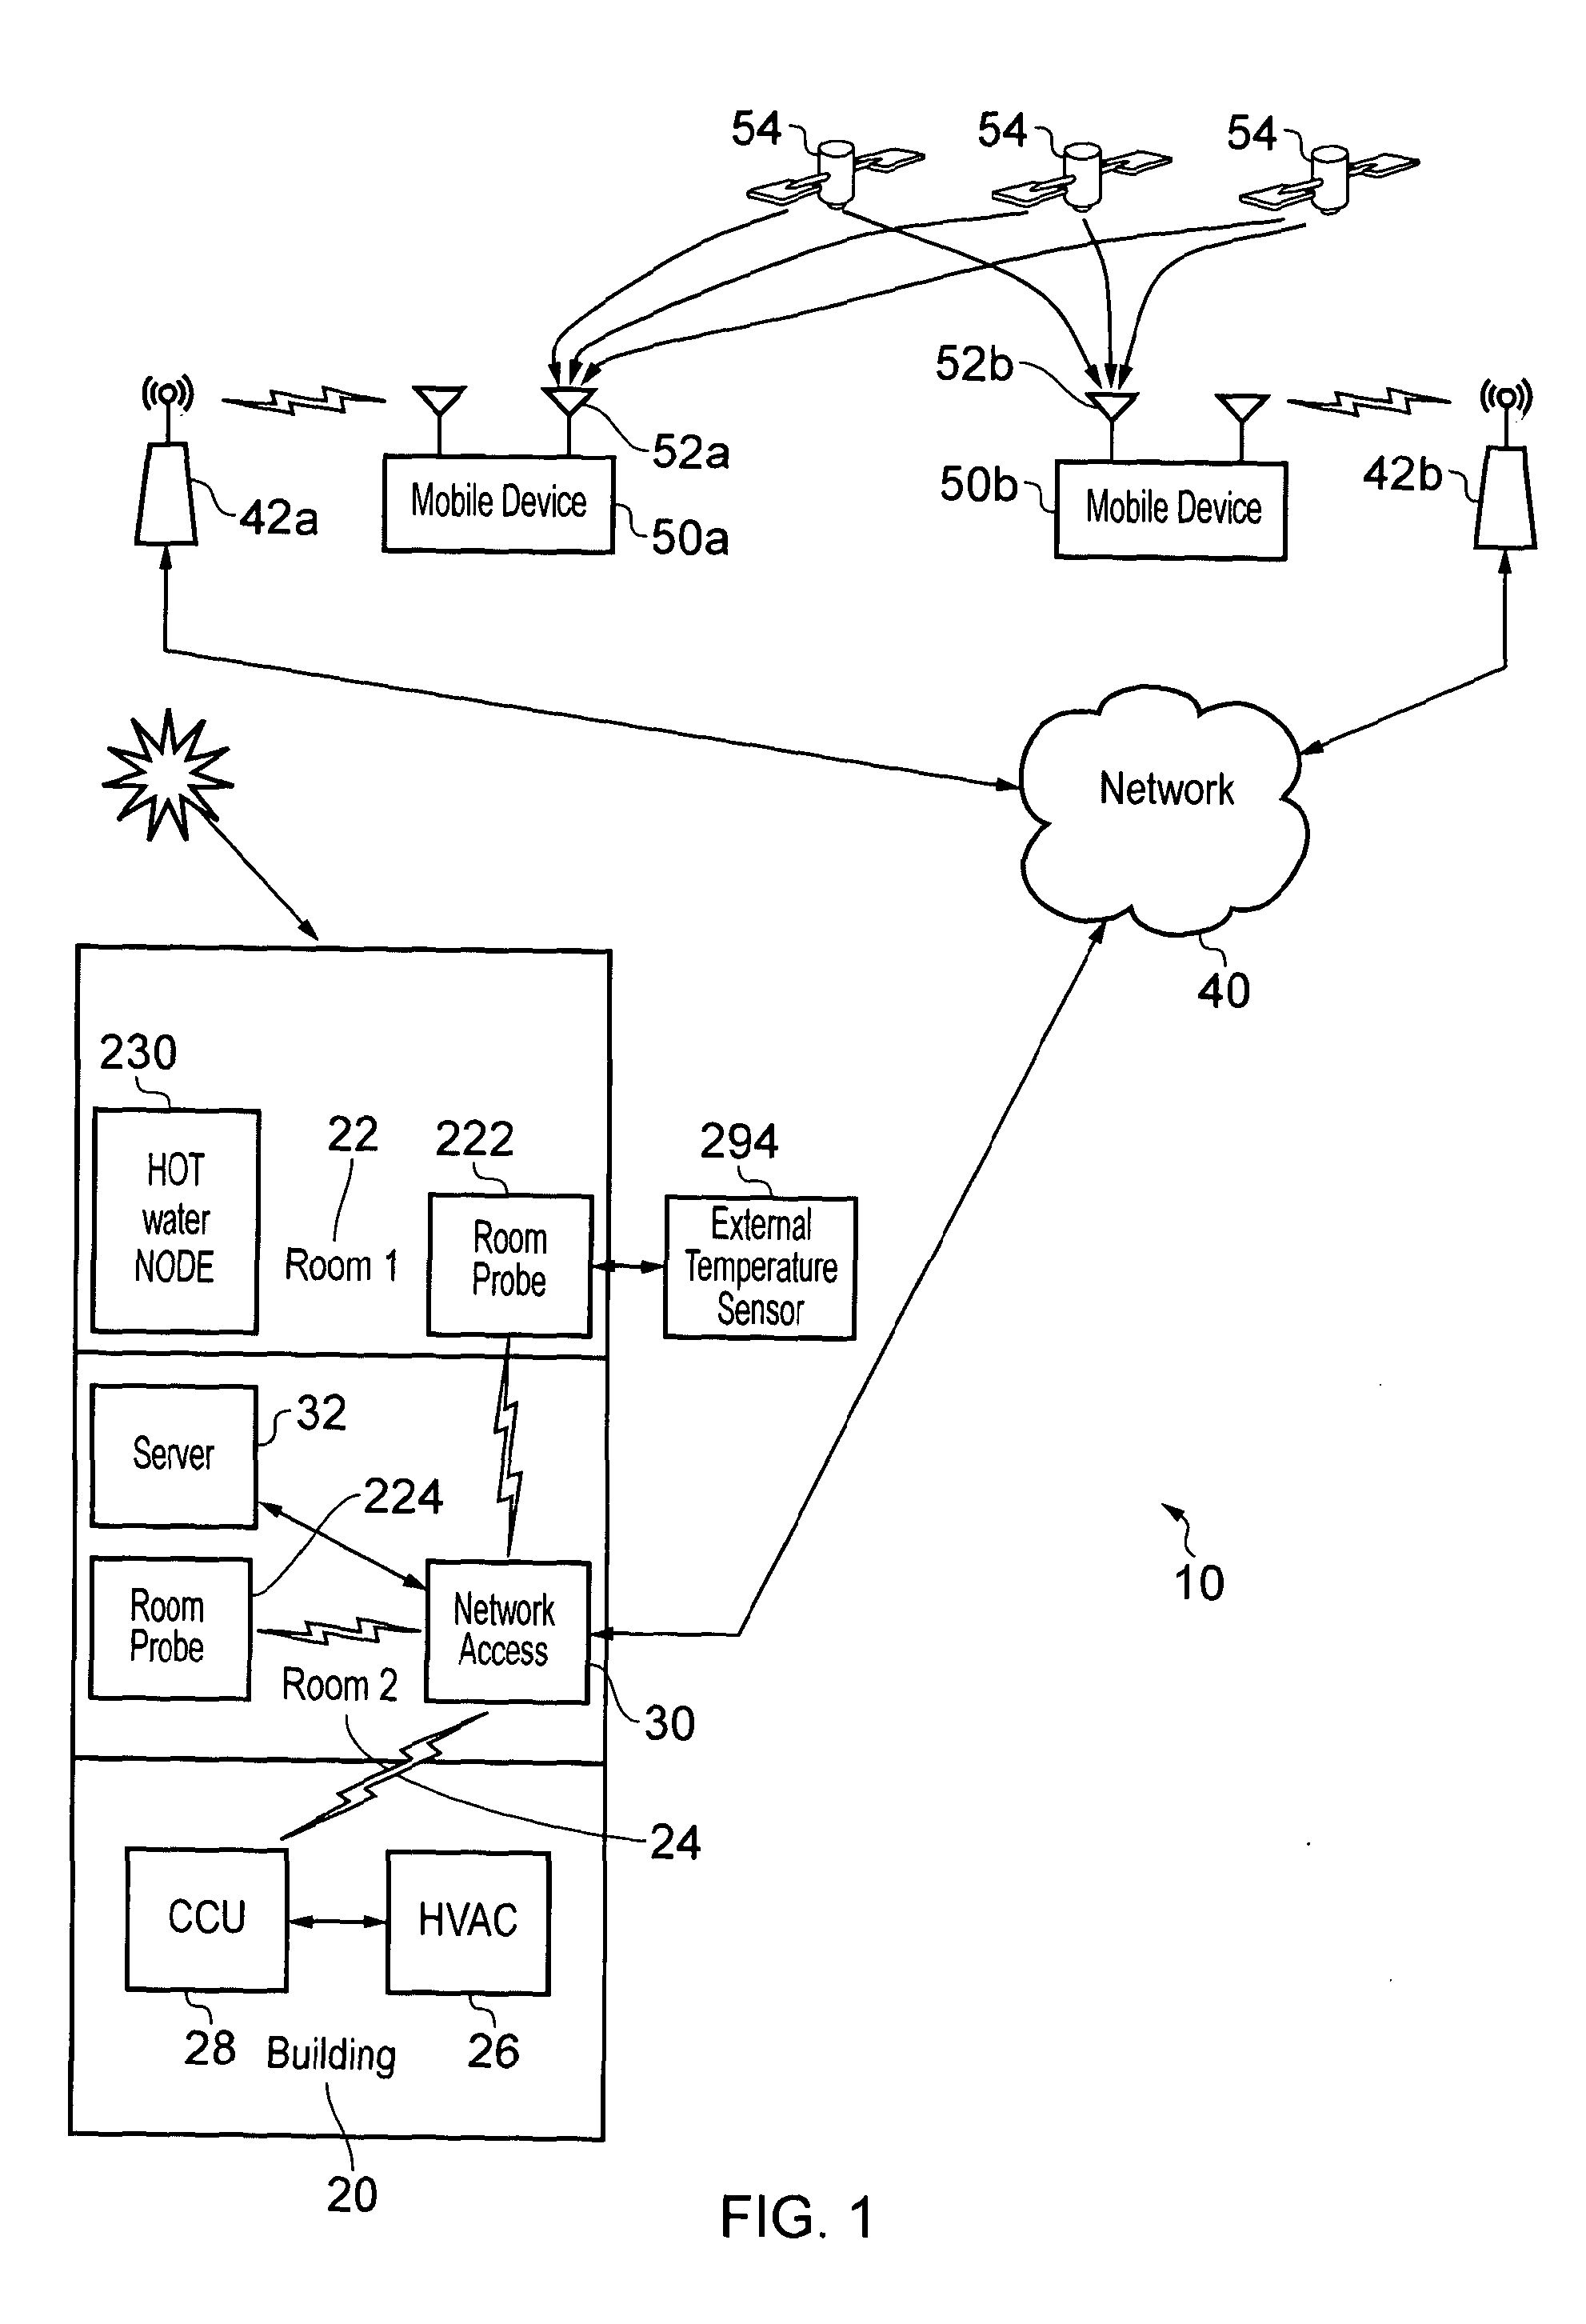 Building occupancy dependent control system